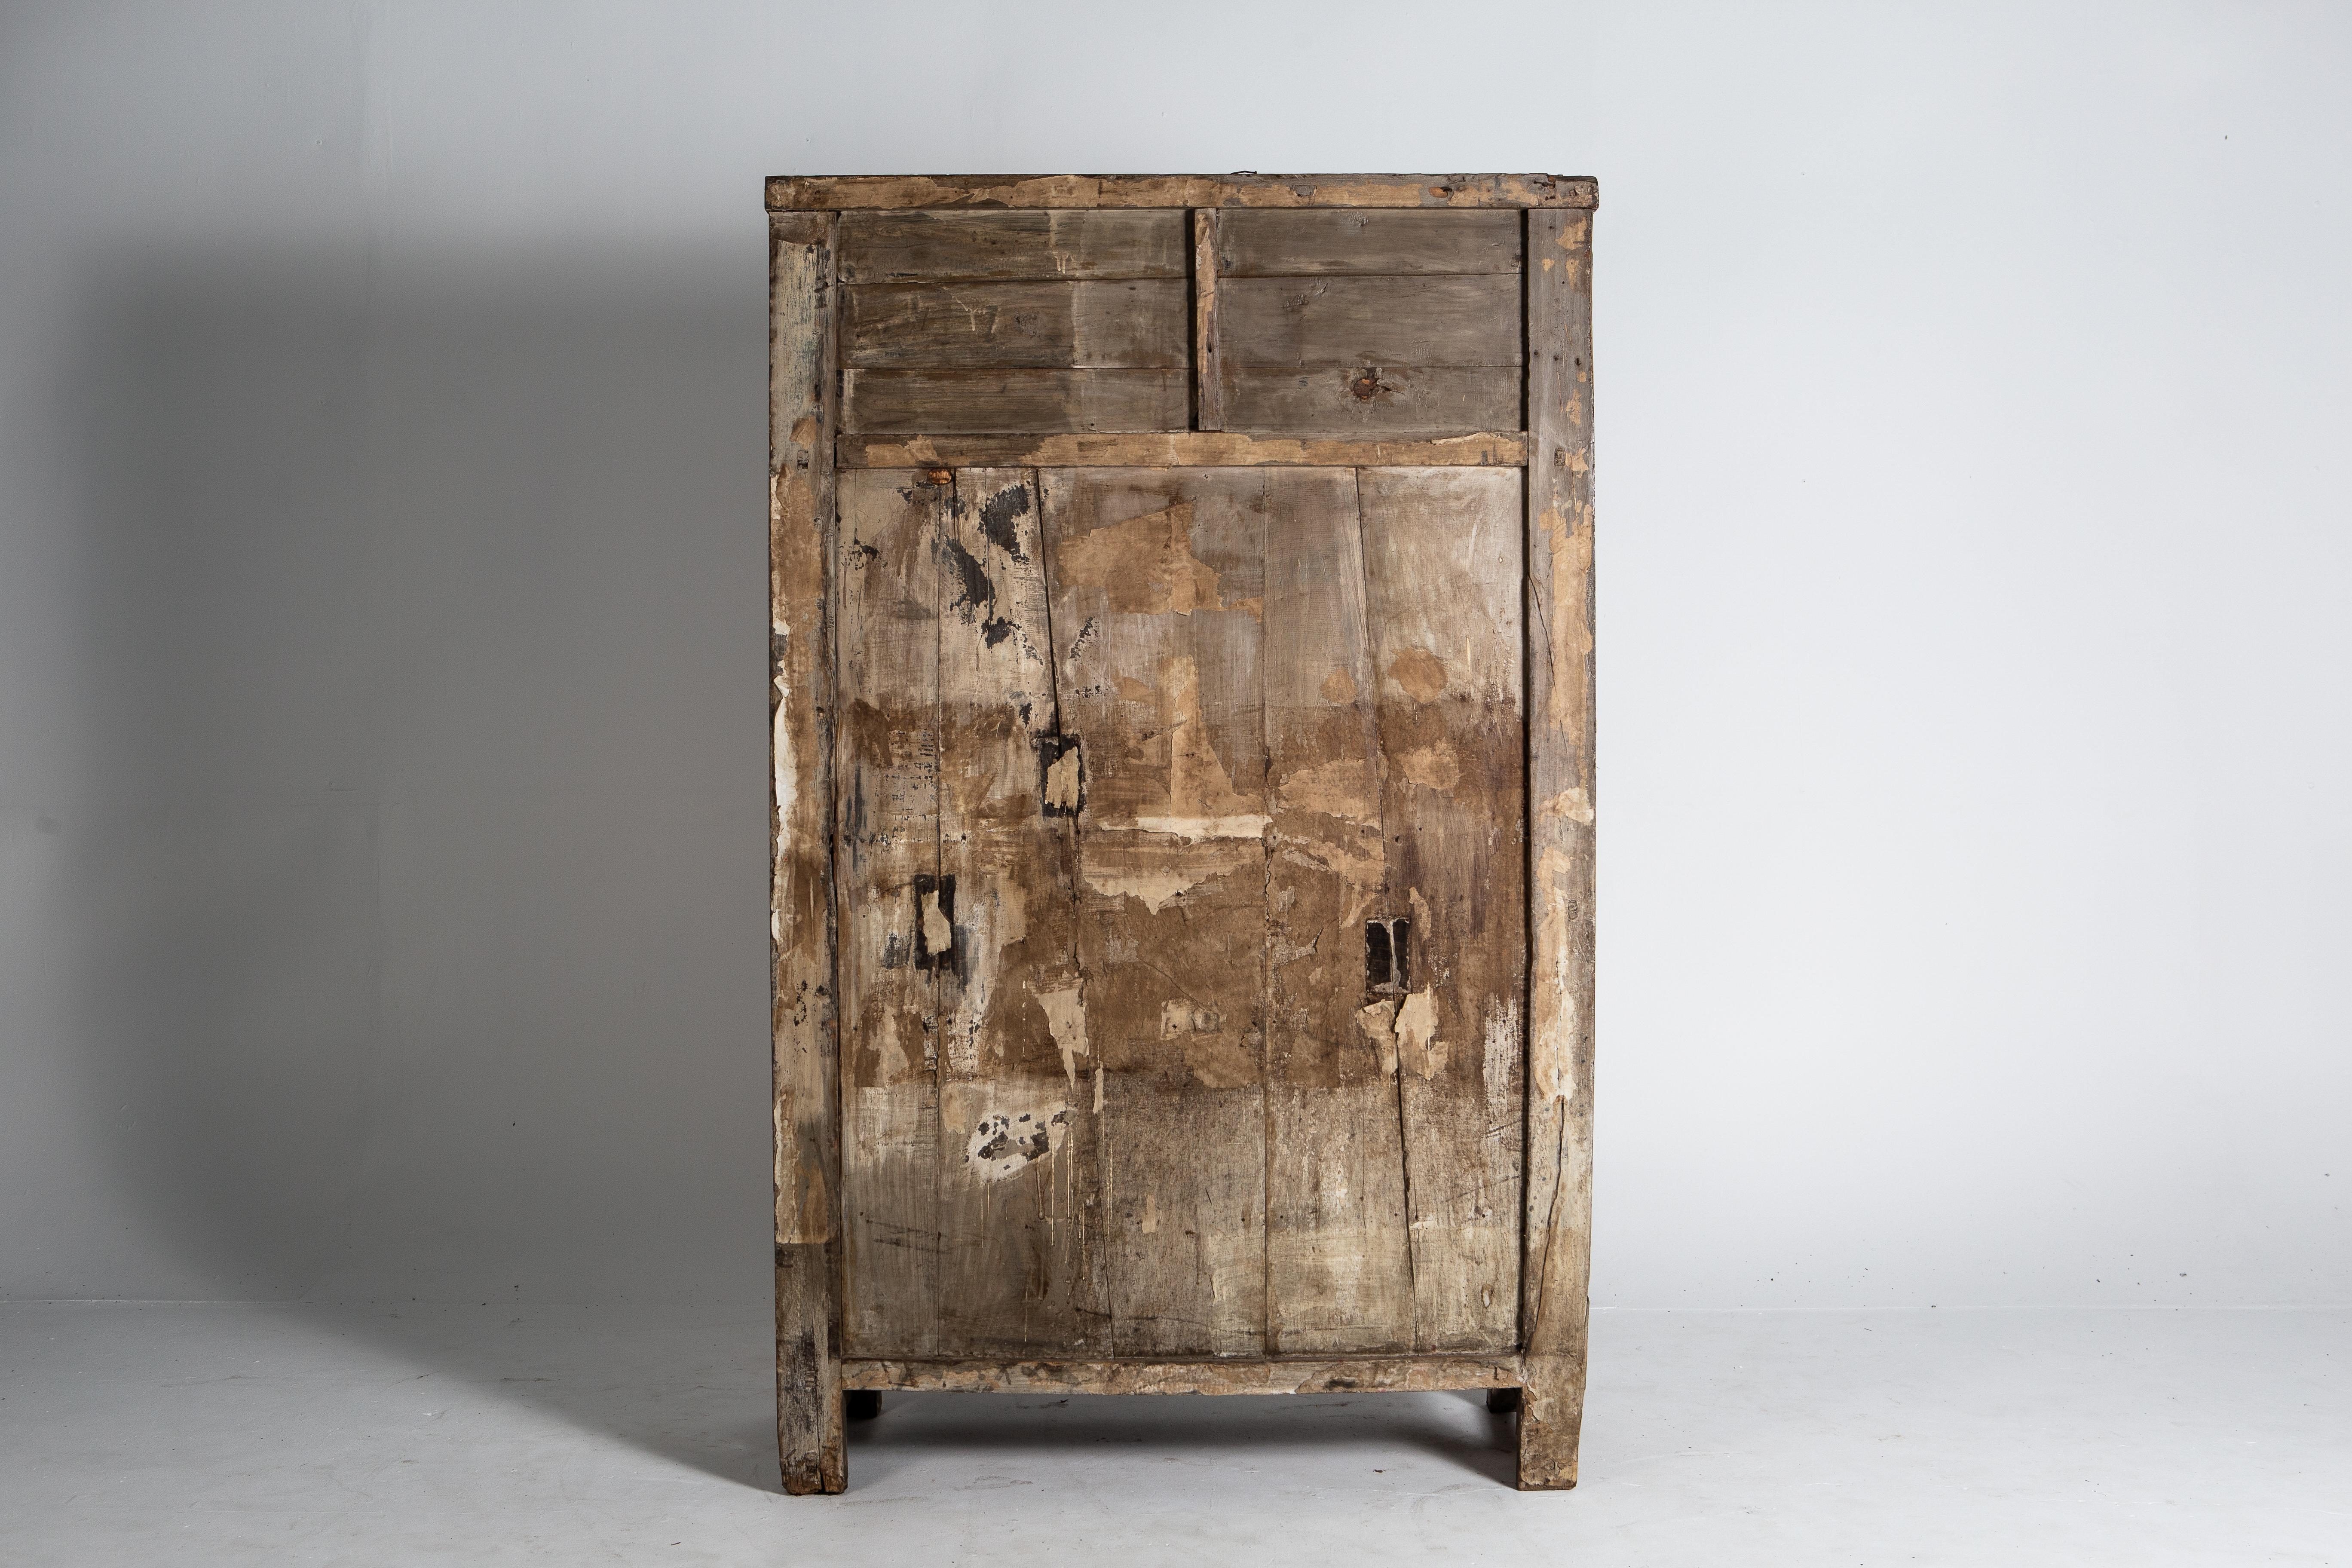 This apothecary cabinet has a beautiful aged patina. The piece has 35 drawers with traces of elegant calligraphy, indicating the contents of each. The addition of an open display shelf above now provides room for books, vases, or other decorative